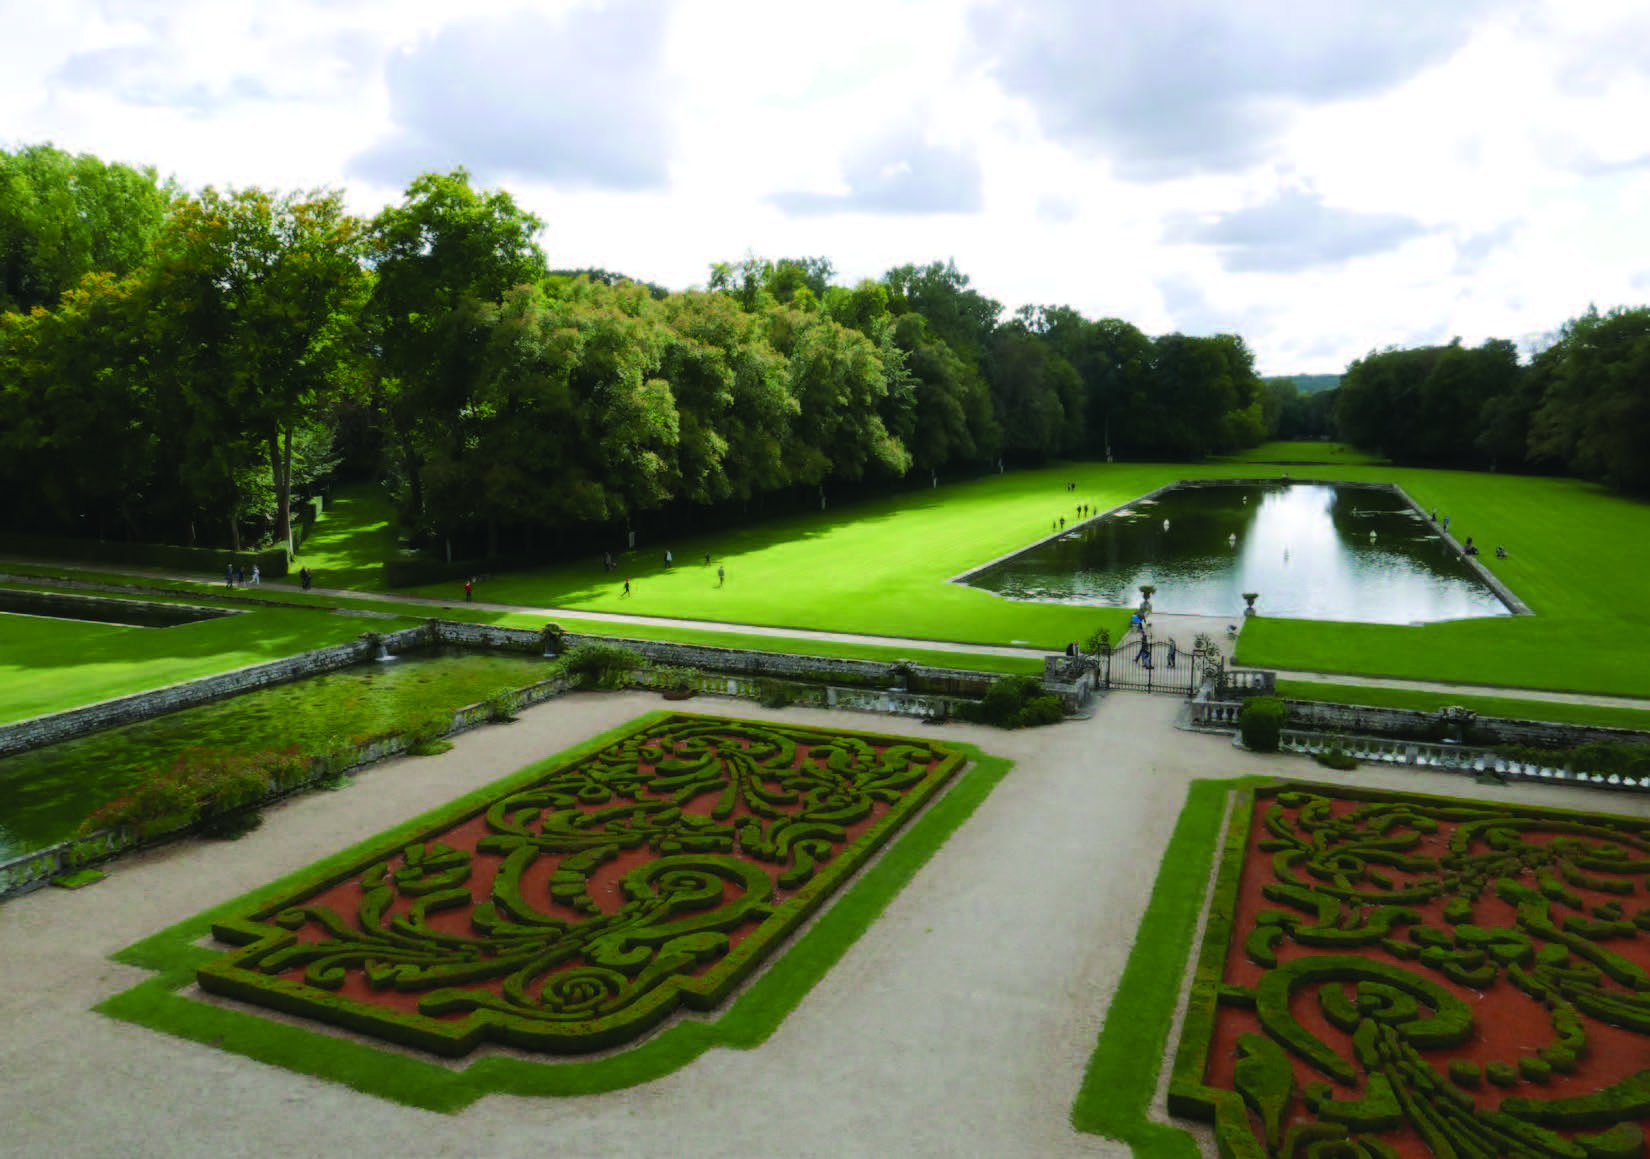 A landscape view of the lawn in front of the Courances Chateau, including a rectangular pond in the background and topiary bushes in an intricate pattern in the foreground.